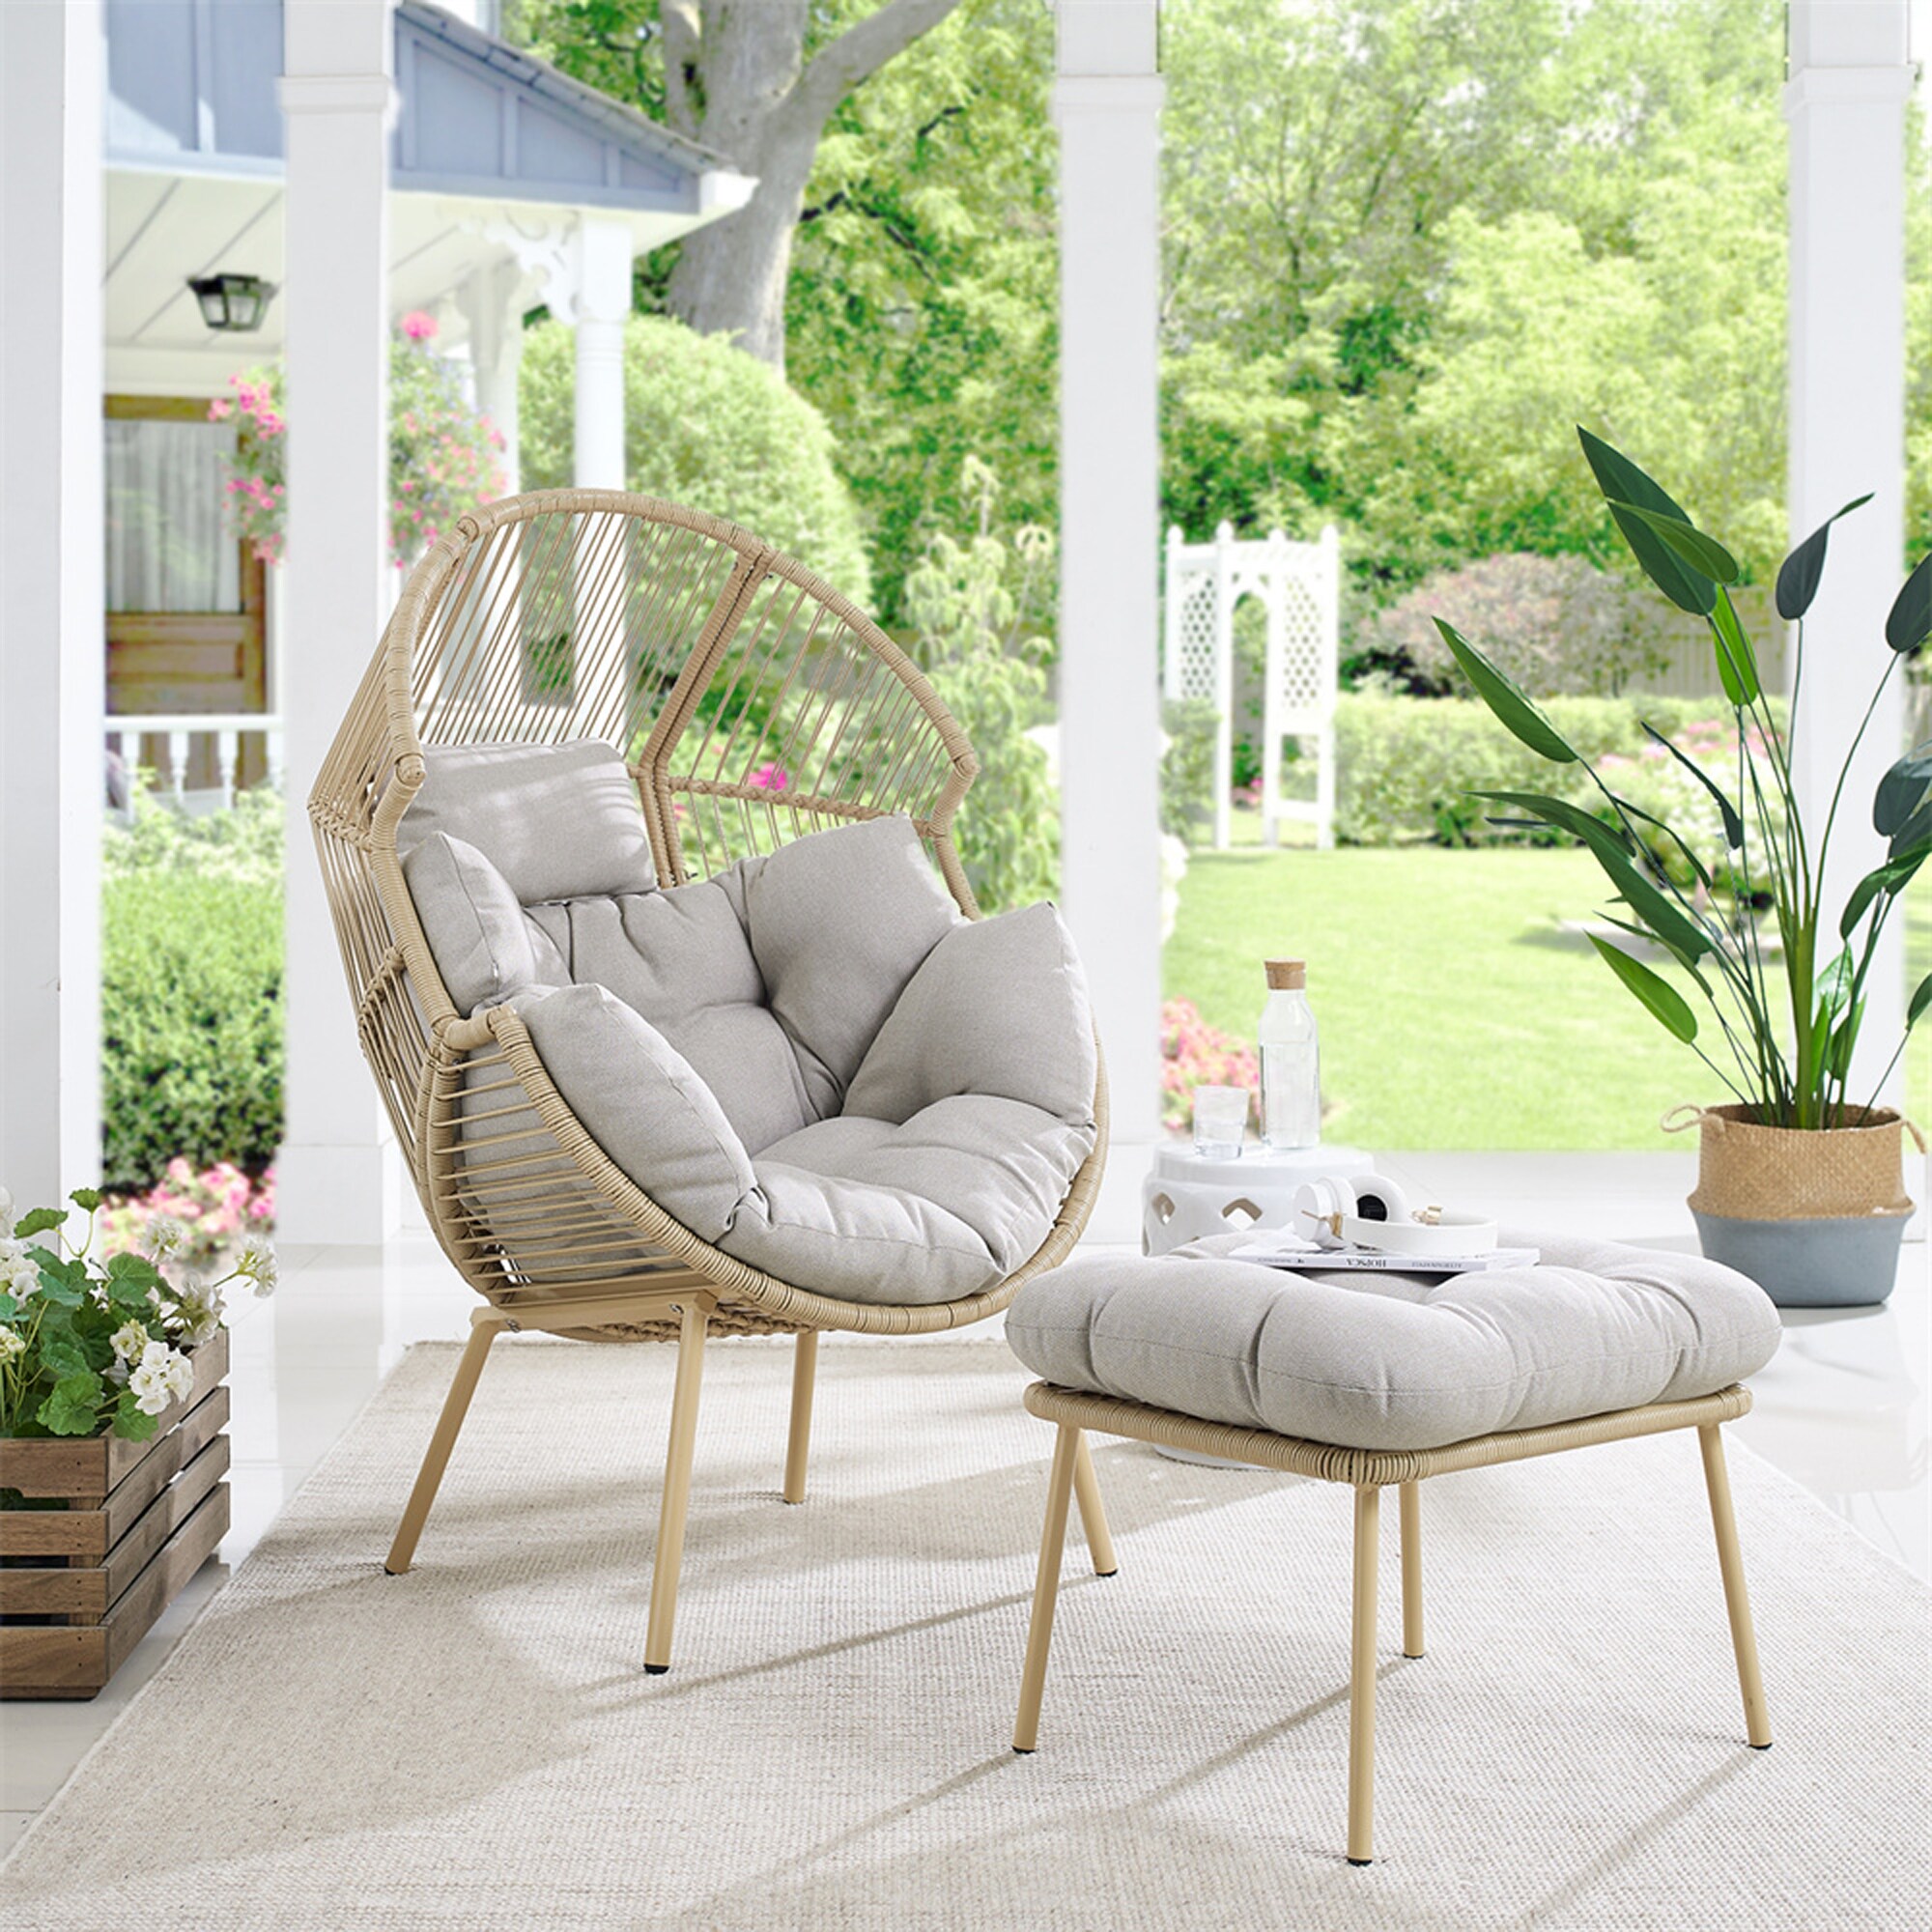 seat cushion,house patio outdoor swing cushions ,small oval hanging egg  chair wicker cushion,hanging swing chair outdoor covers replacement,hammock  indoor furniture swing cushion 